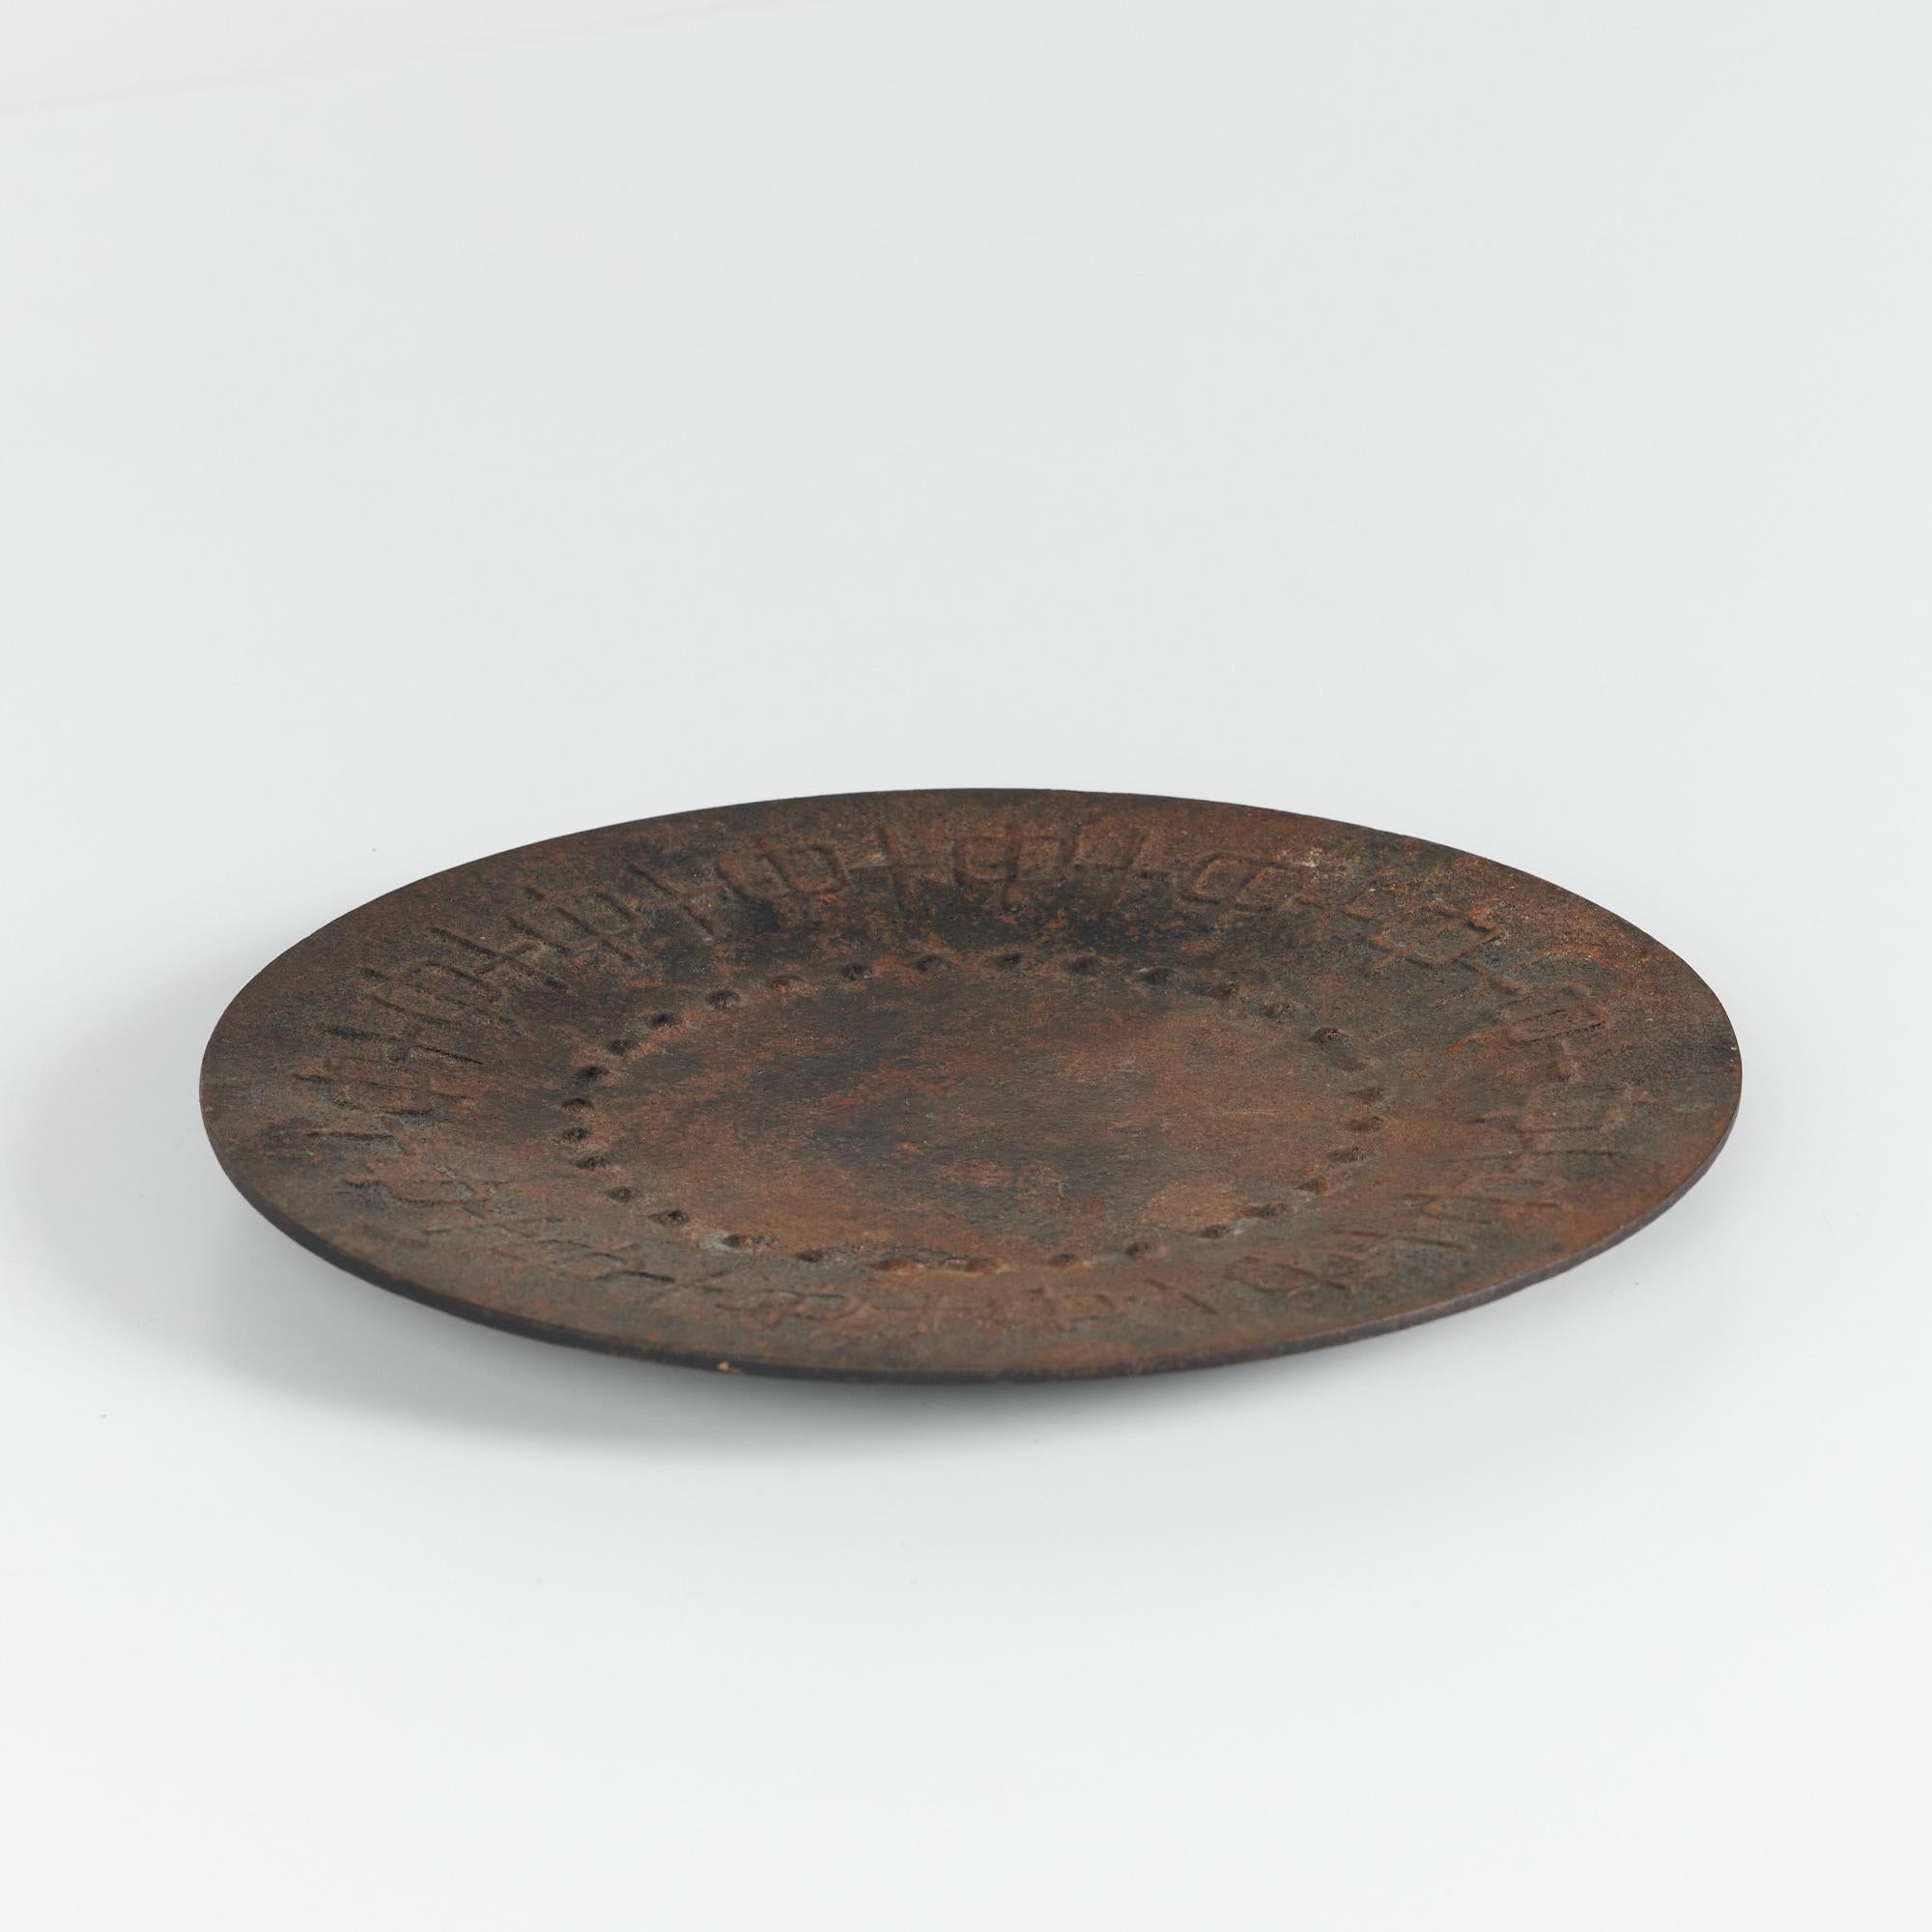 Round patinated metal plate with a unique raised linear detailing.

Dimensions: 9.5